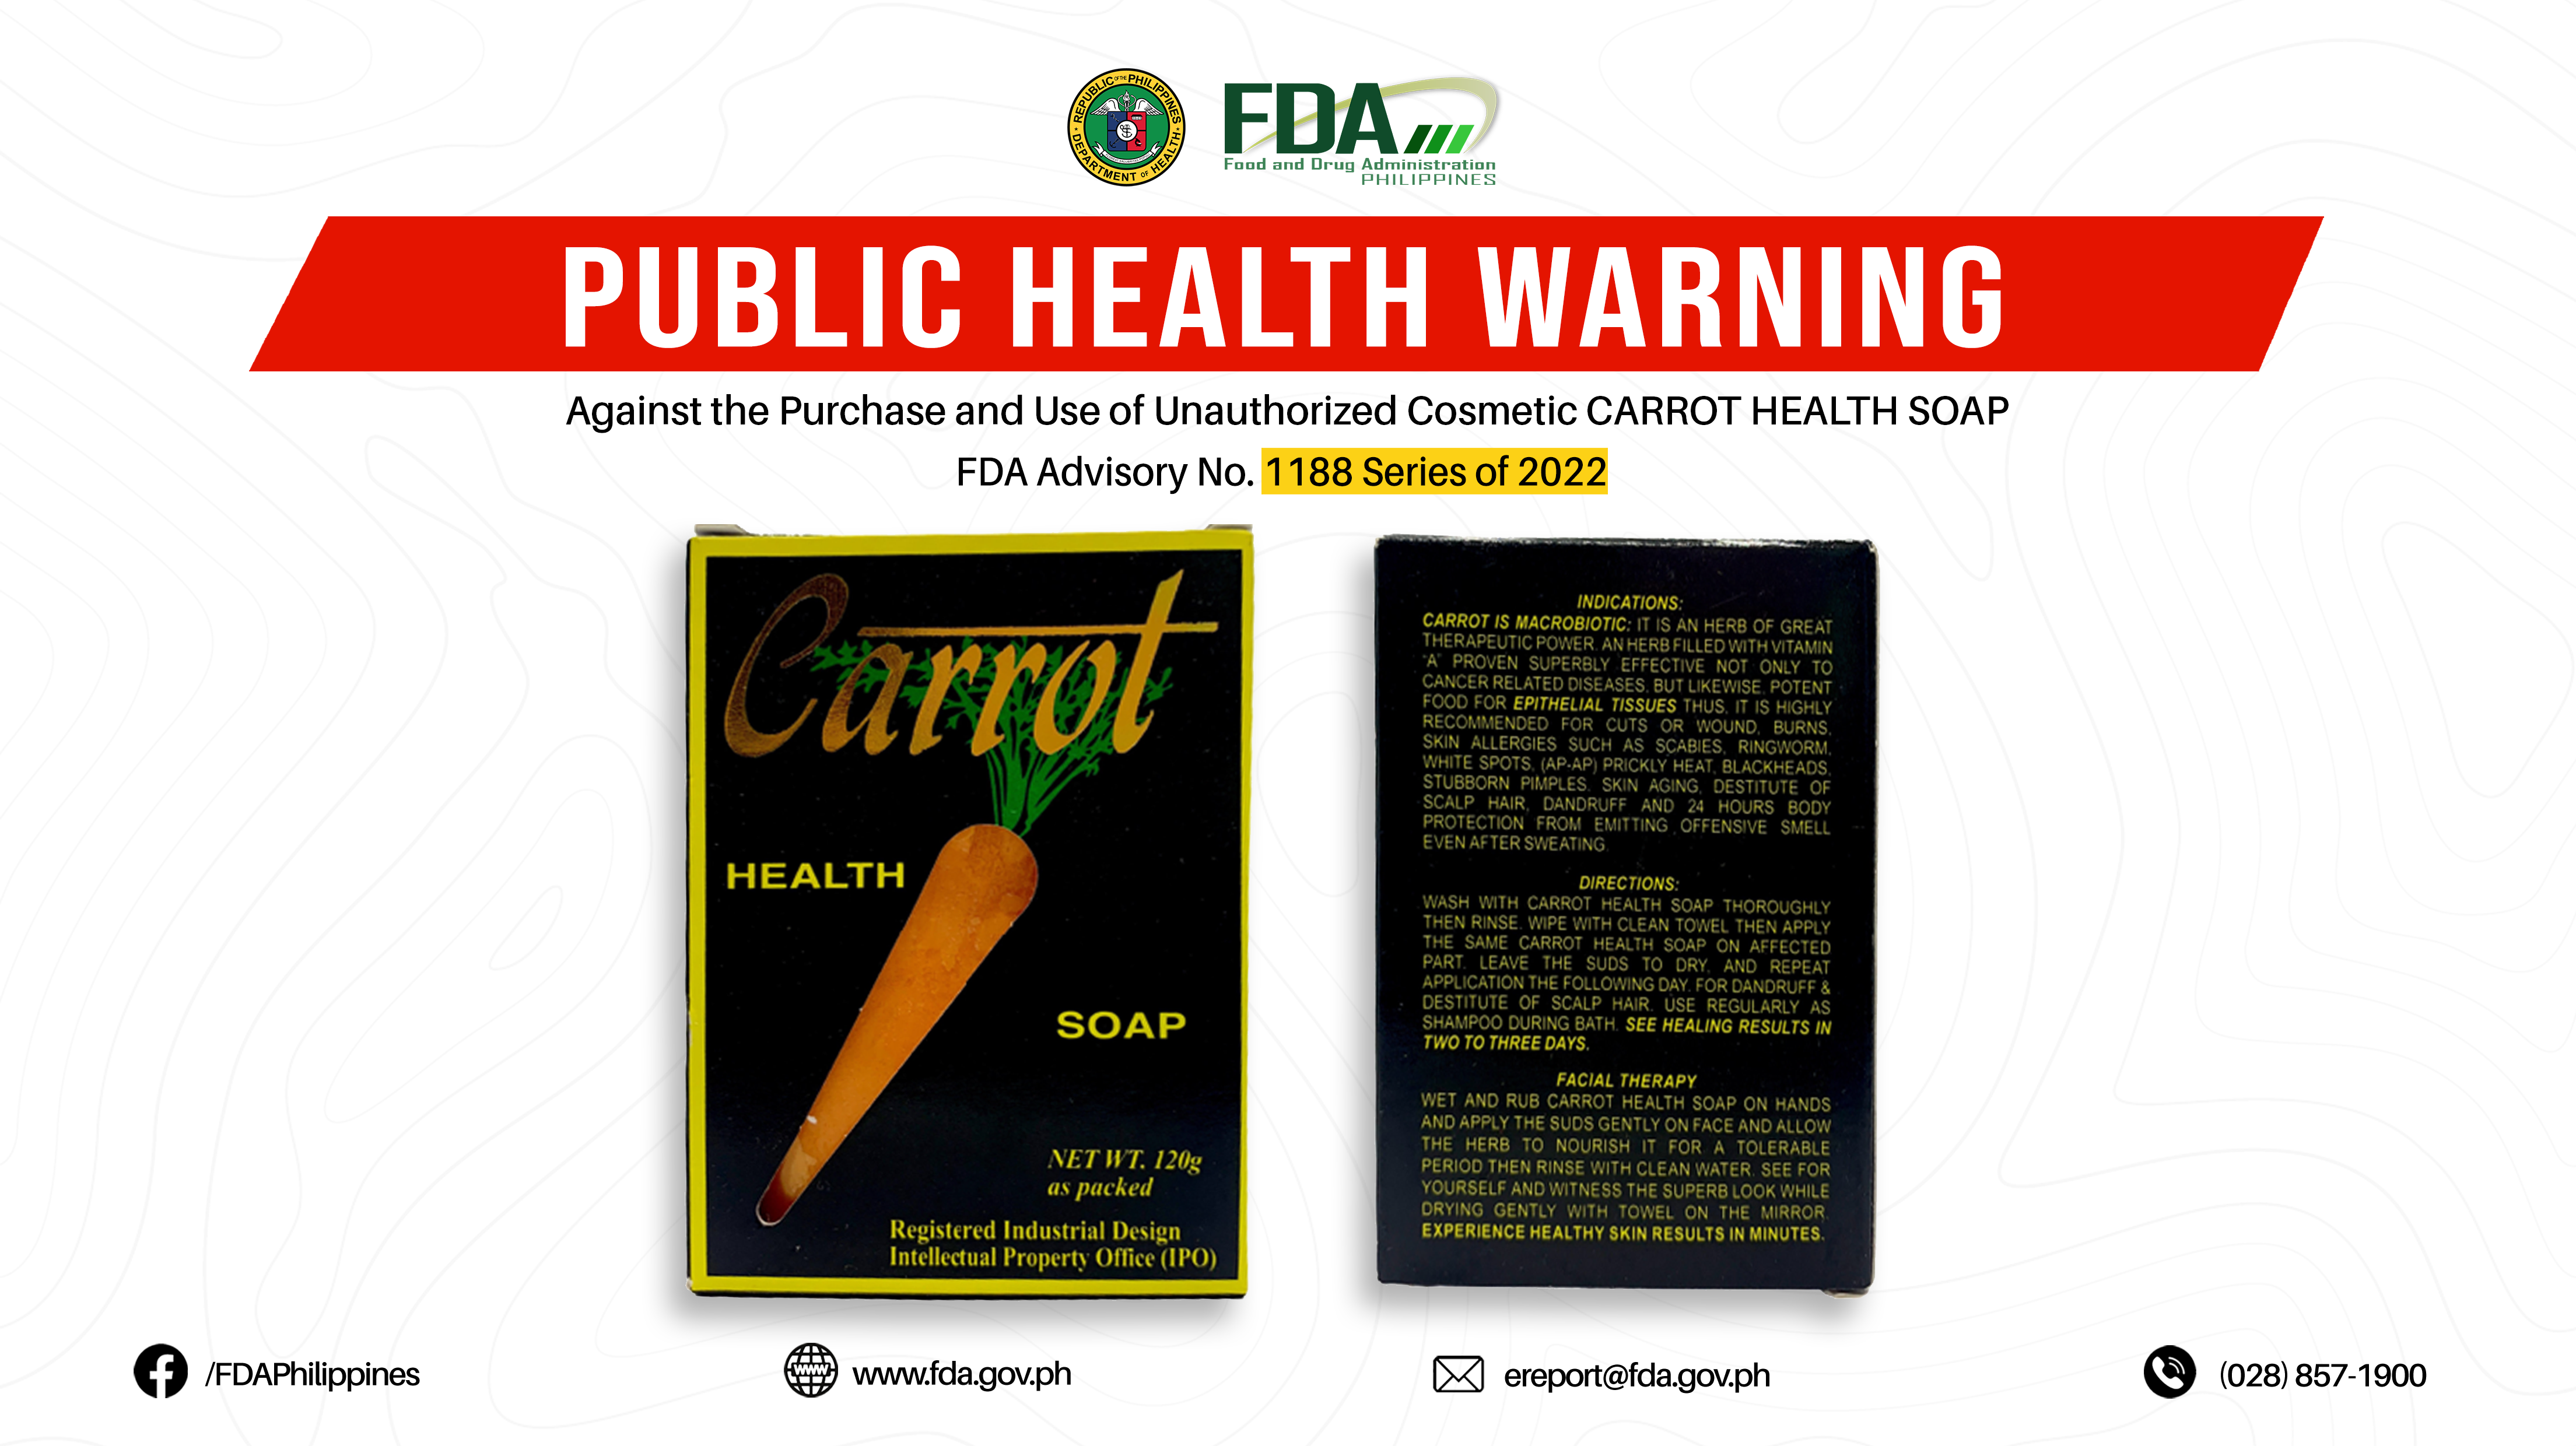 FDA Advisory No.2022-1188 || Public Health Warning Against the Purchase and Use of Unauthorized Cosmetic CARROT HEALTH SOAP